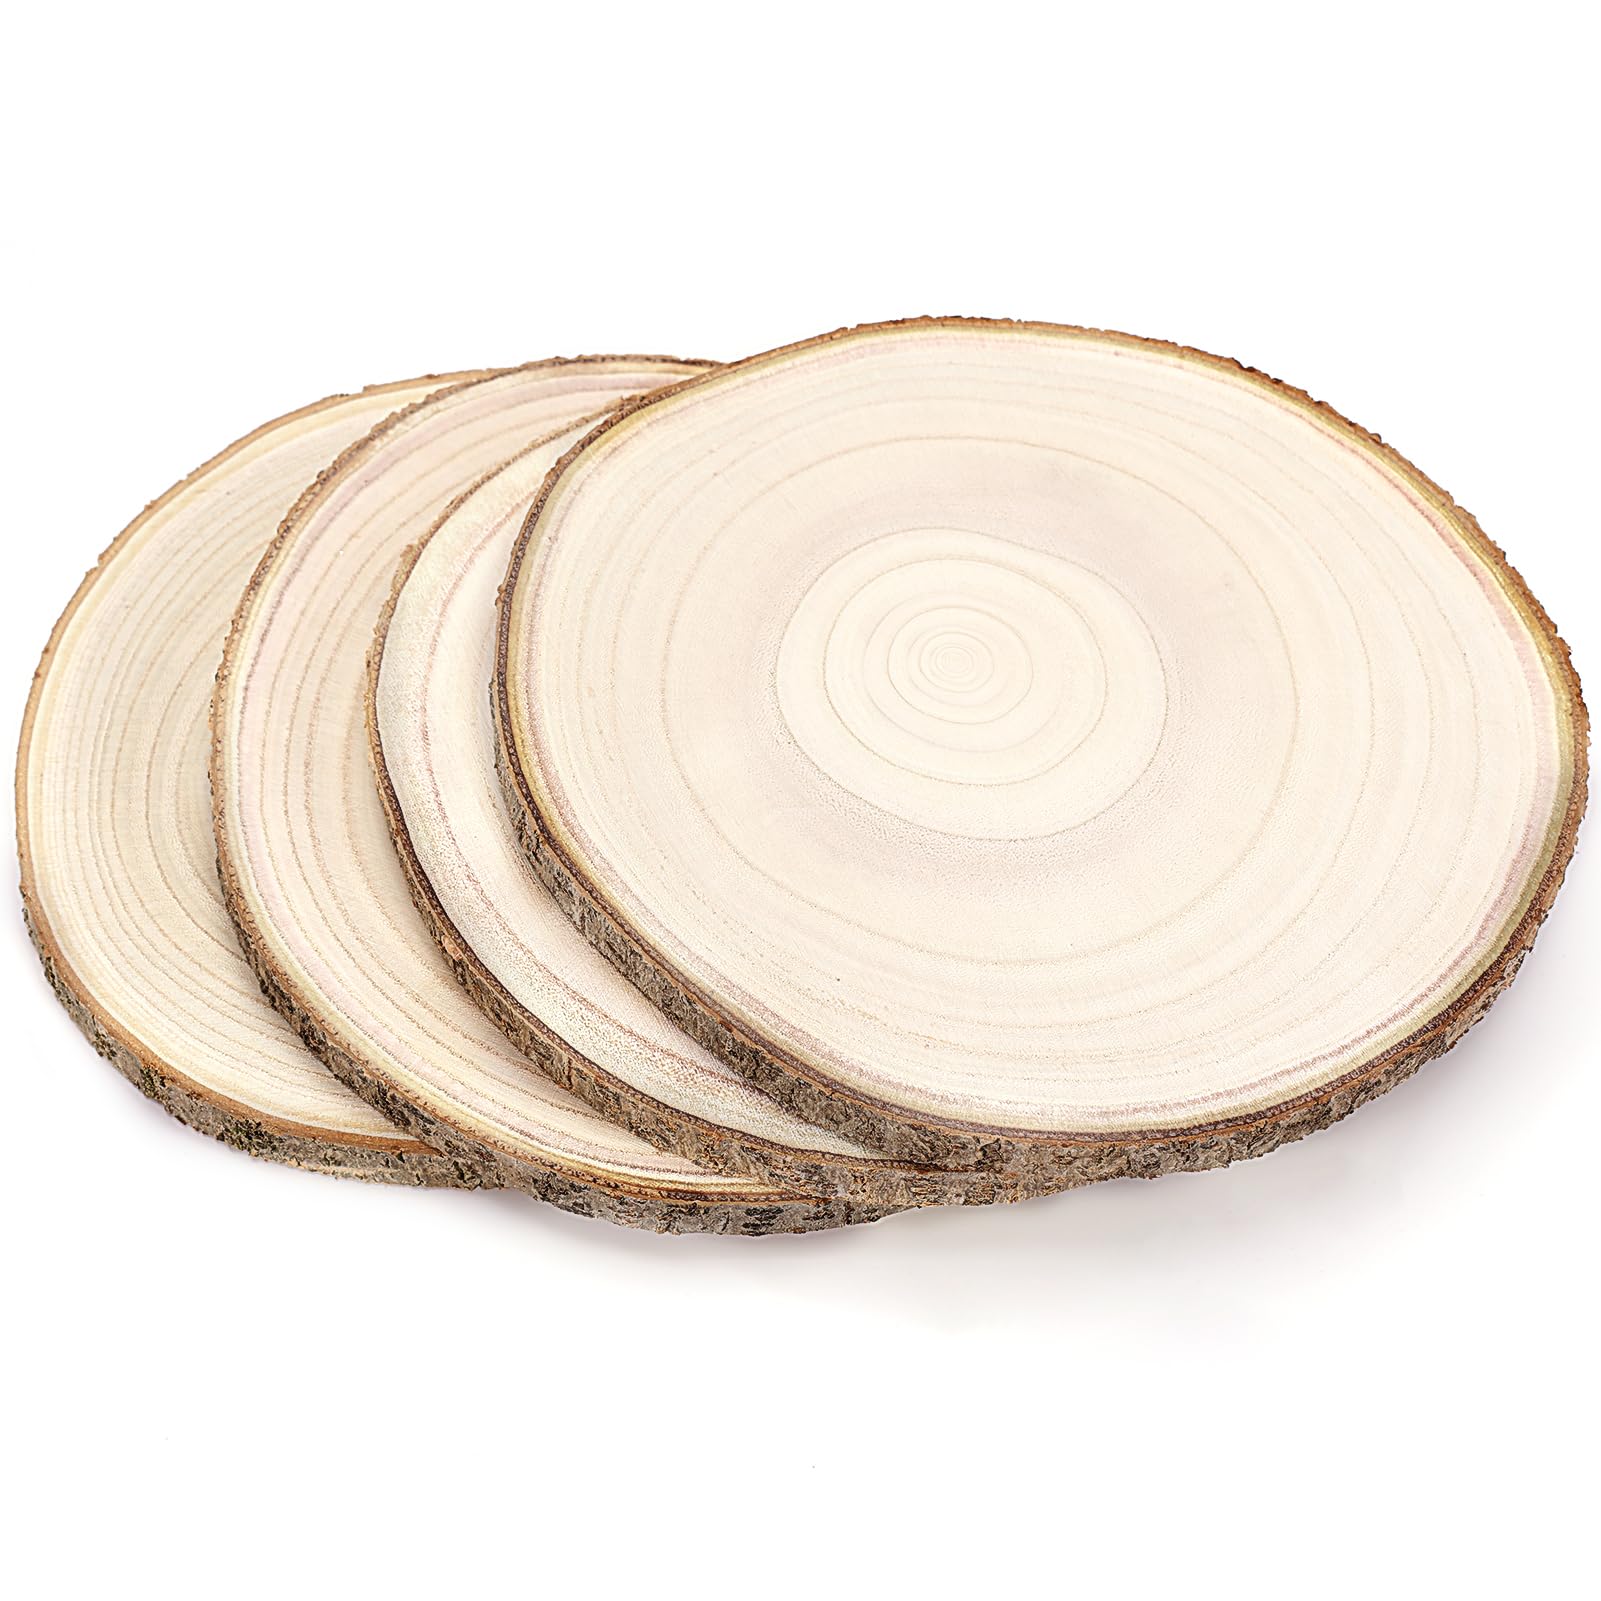  Caydo 10 Pieces 8-9 Inch Wood Slices for Centerpieces with Wood  Table Number Holders and Card for Wedding Table Centerpiece Decoration,  Parties, Housewarming and Family Gatherings